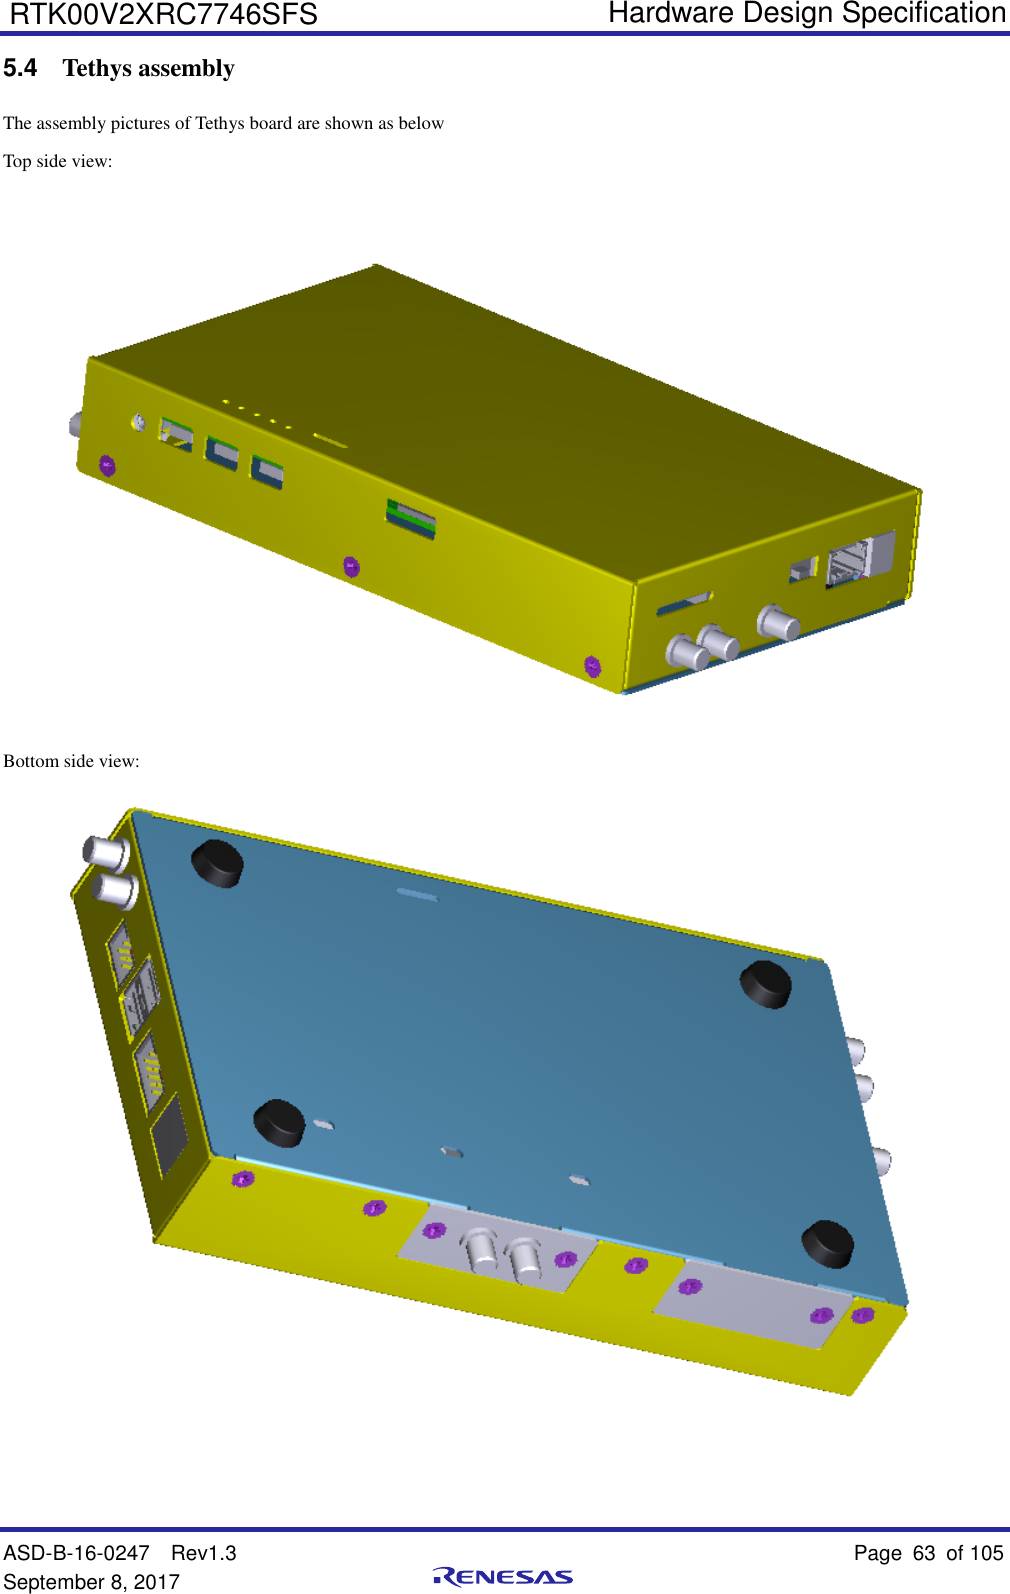   Hardware Design Specification ASD-B-16-0247  Rev1.3    Page 63  of 105 September 8, 2017      RTK00V2XRC7746SFS 5.4  Tethys assembly The assembly pictures of Tethys board are shown as below Top side view:   Bottom side view:    